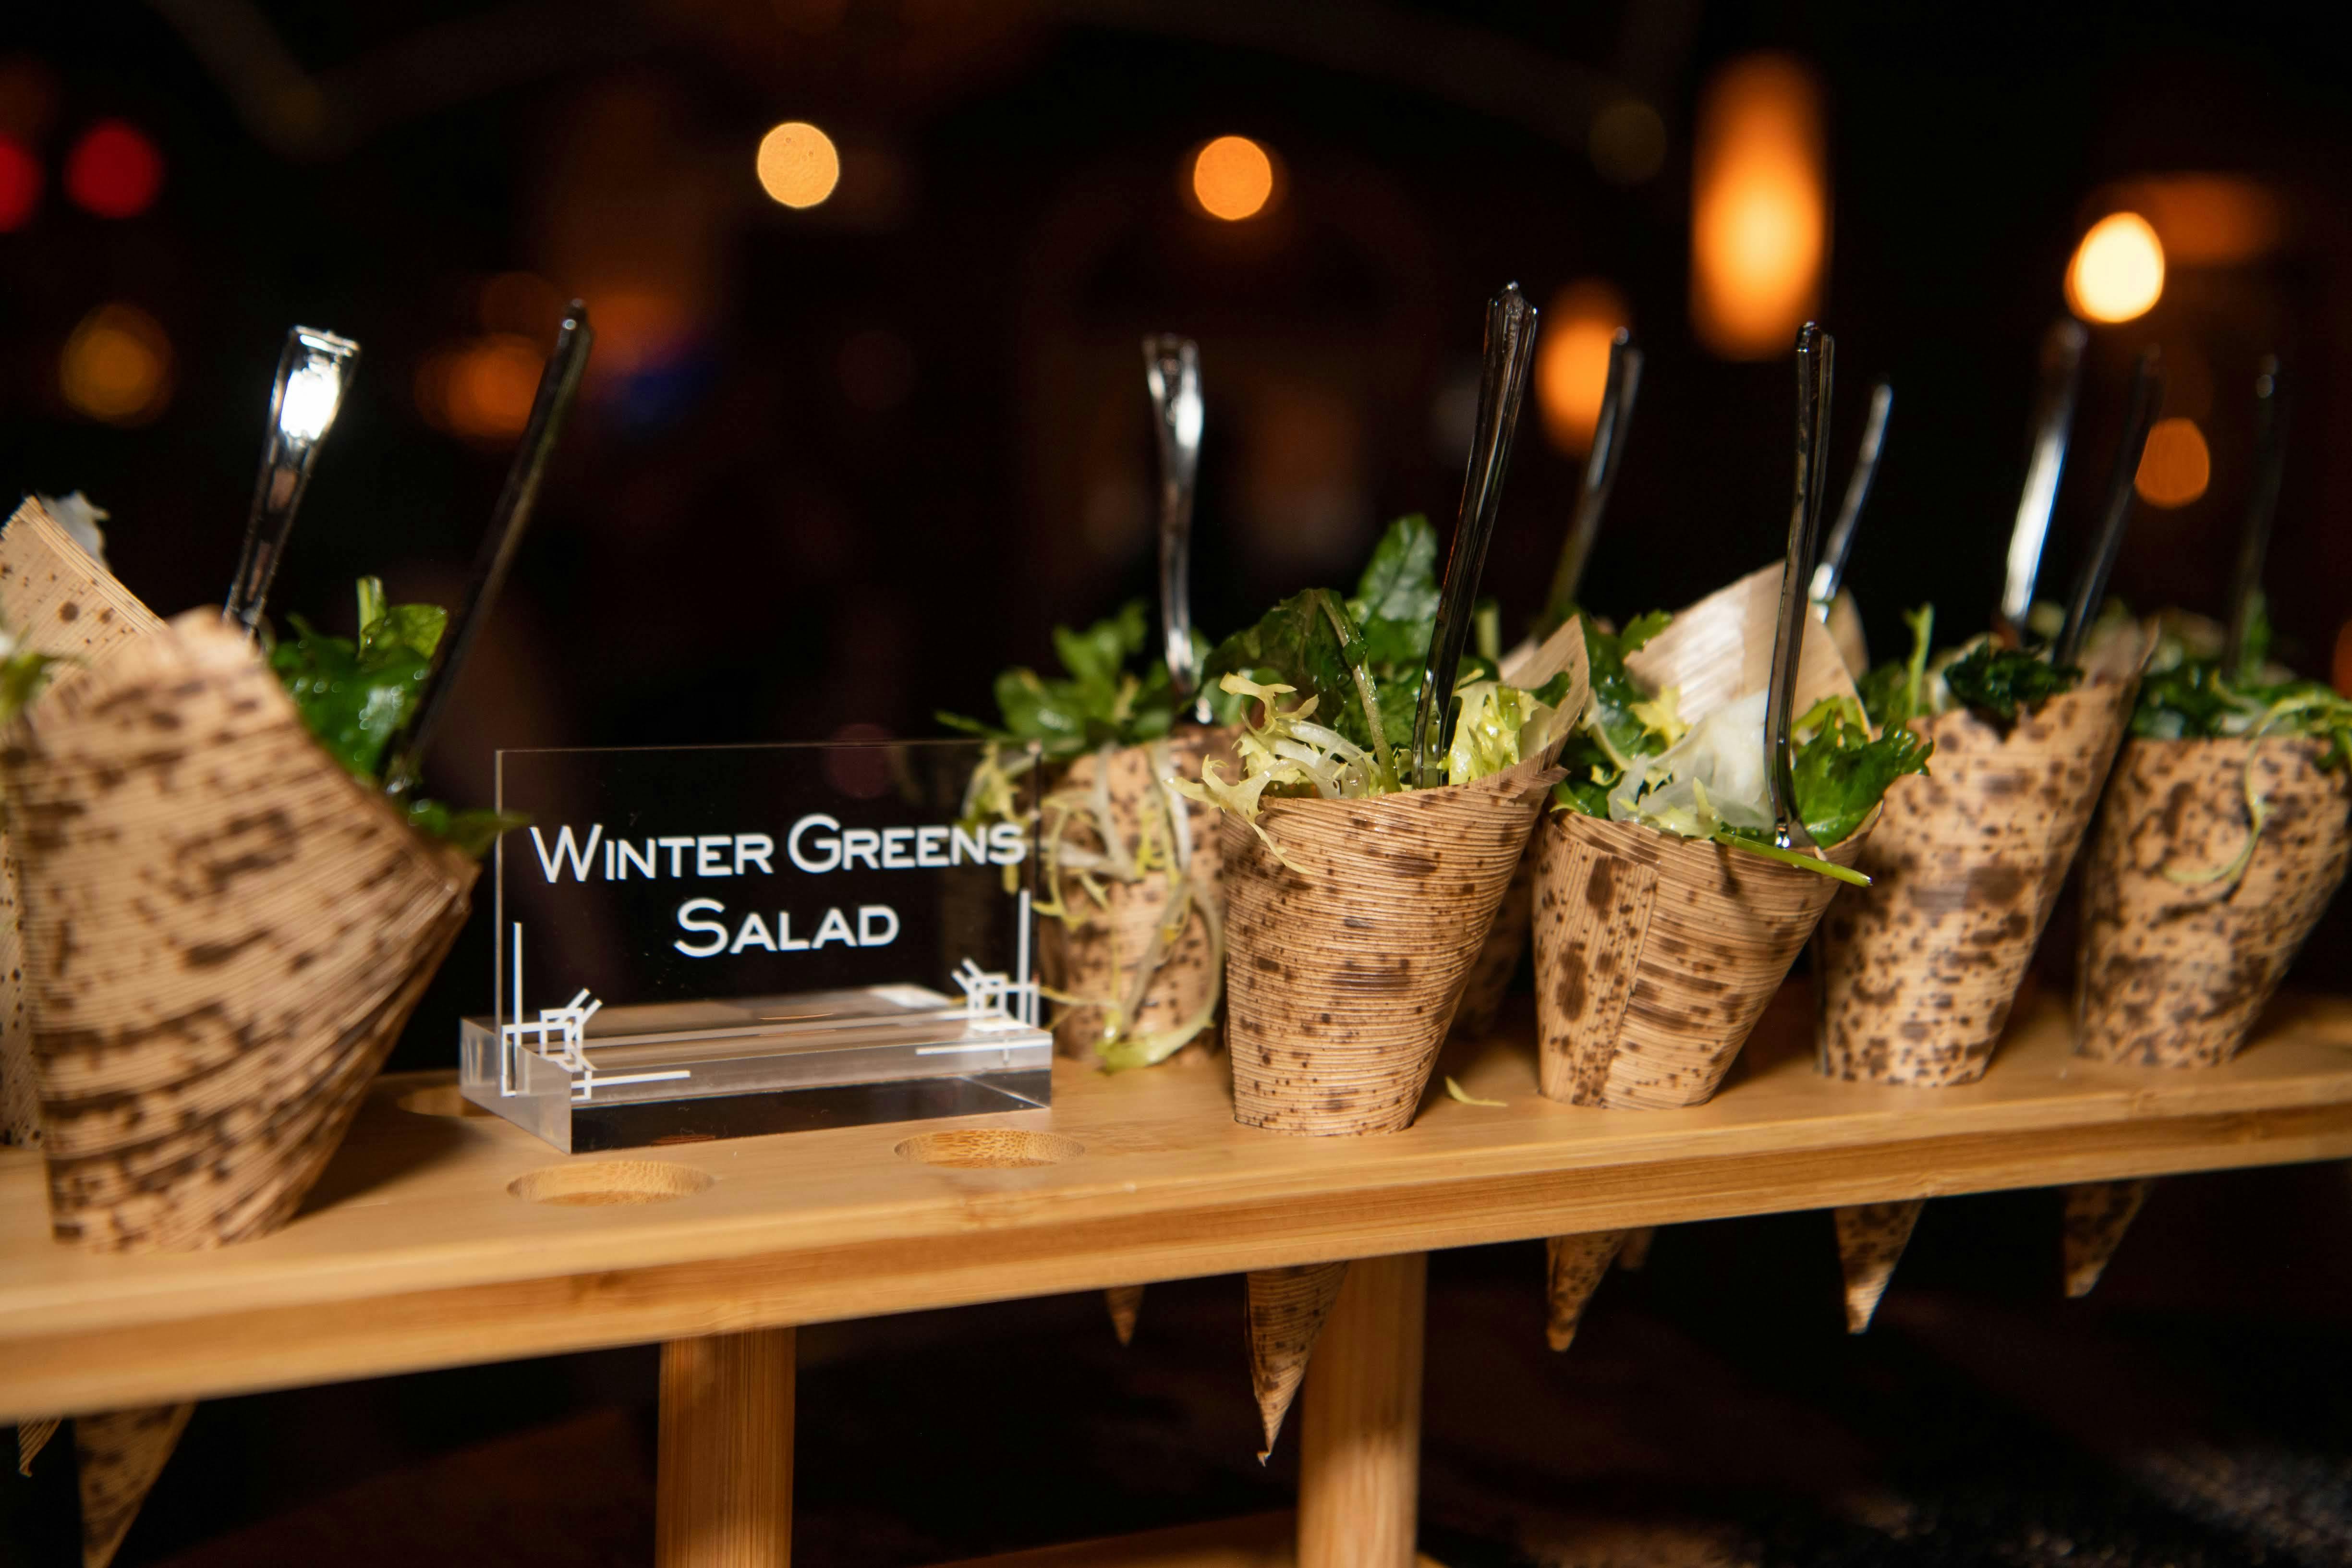 Houston Texans Holiday Party at The Astorian in Houston, TX With Salad in Paper Cones | PartySlate